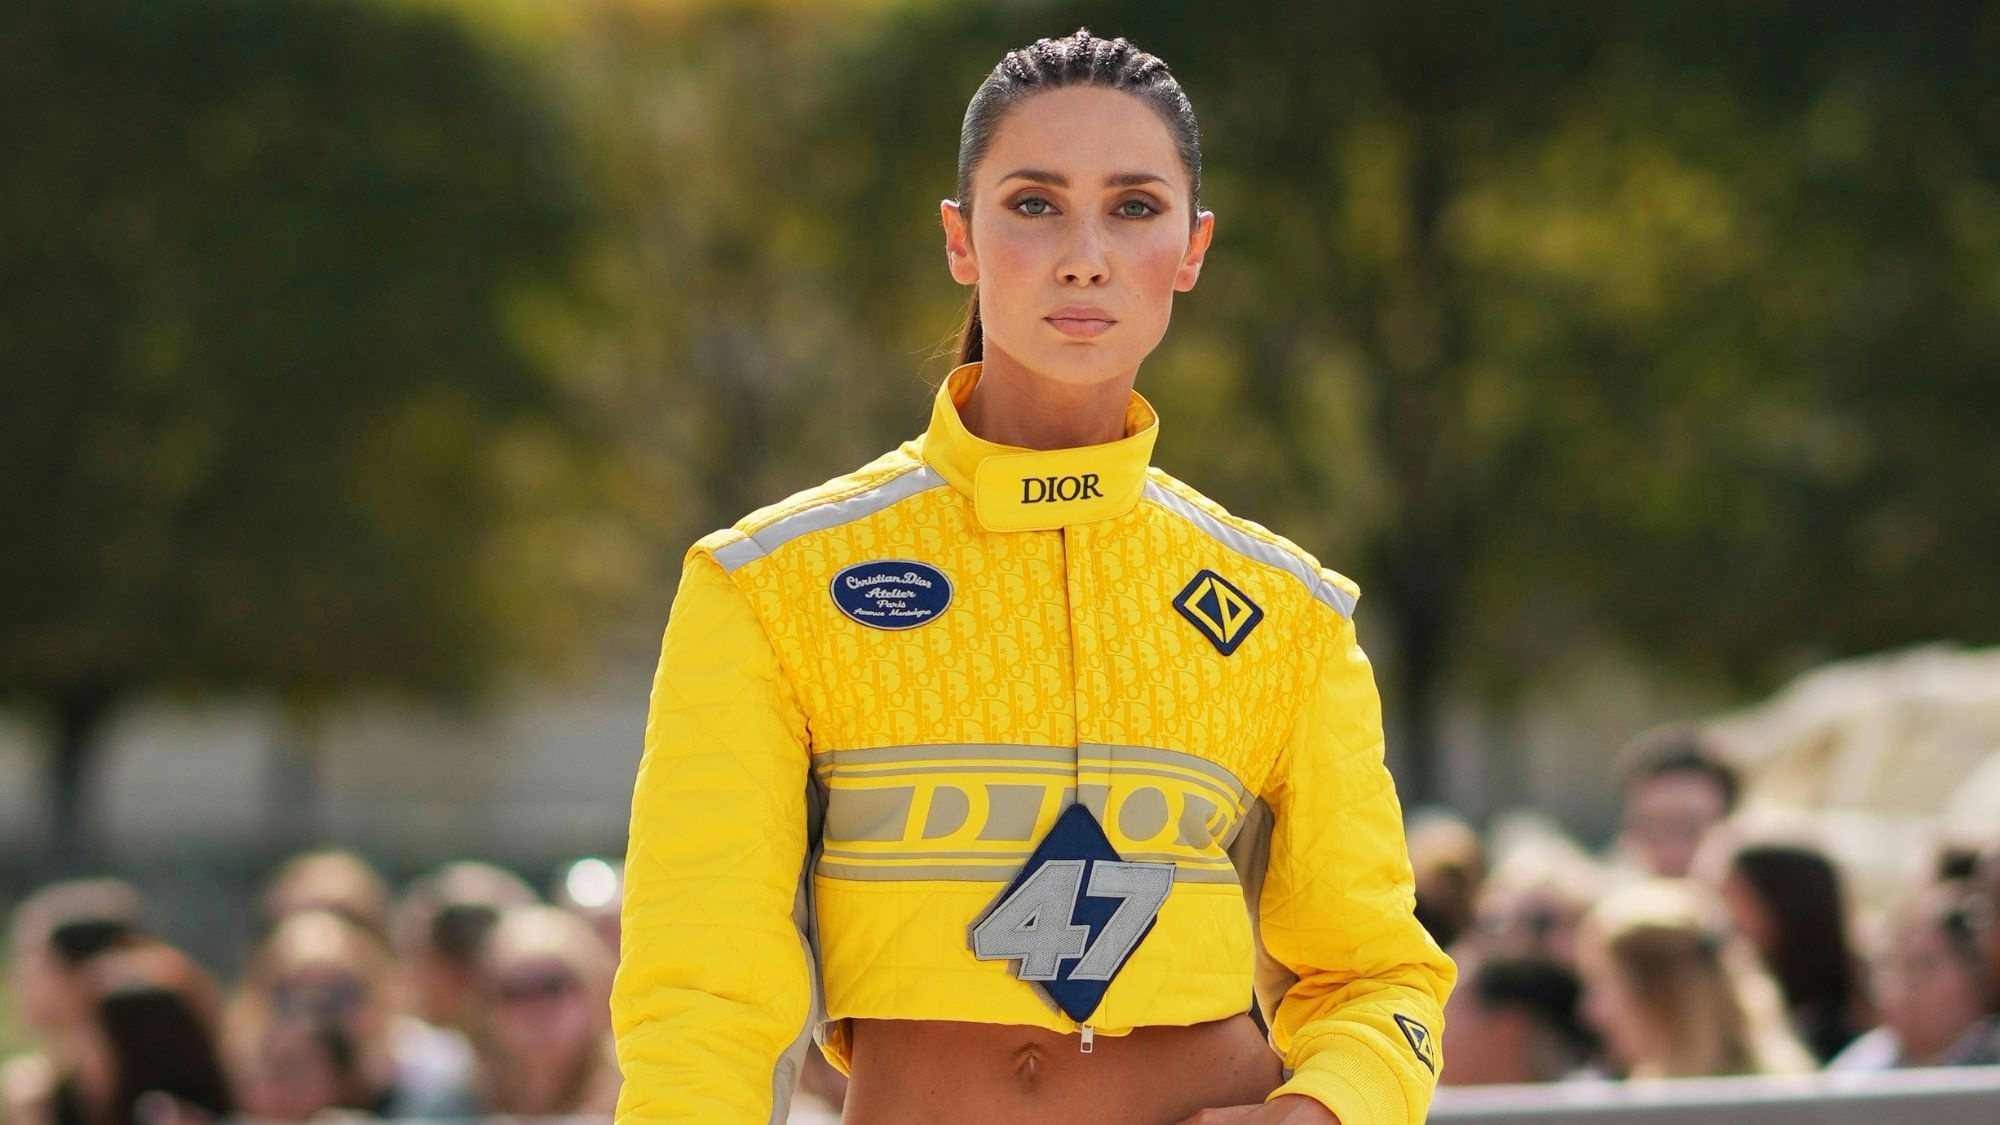 Model Sabina Jakubowicz wears a yellow Dior jacket designed as a F1 driver jacket to attend Dior's Spring 2024 show. Photo: Getty Images